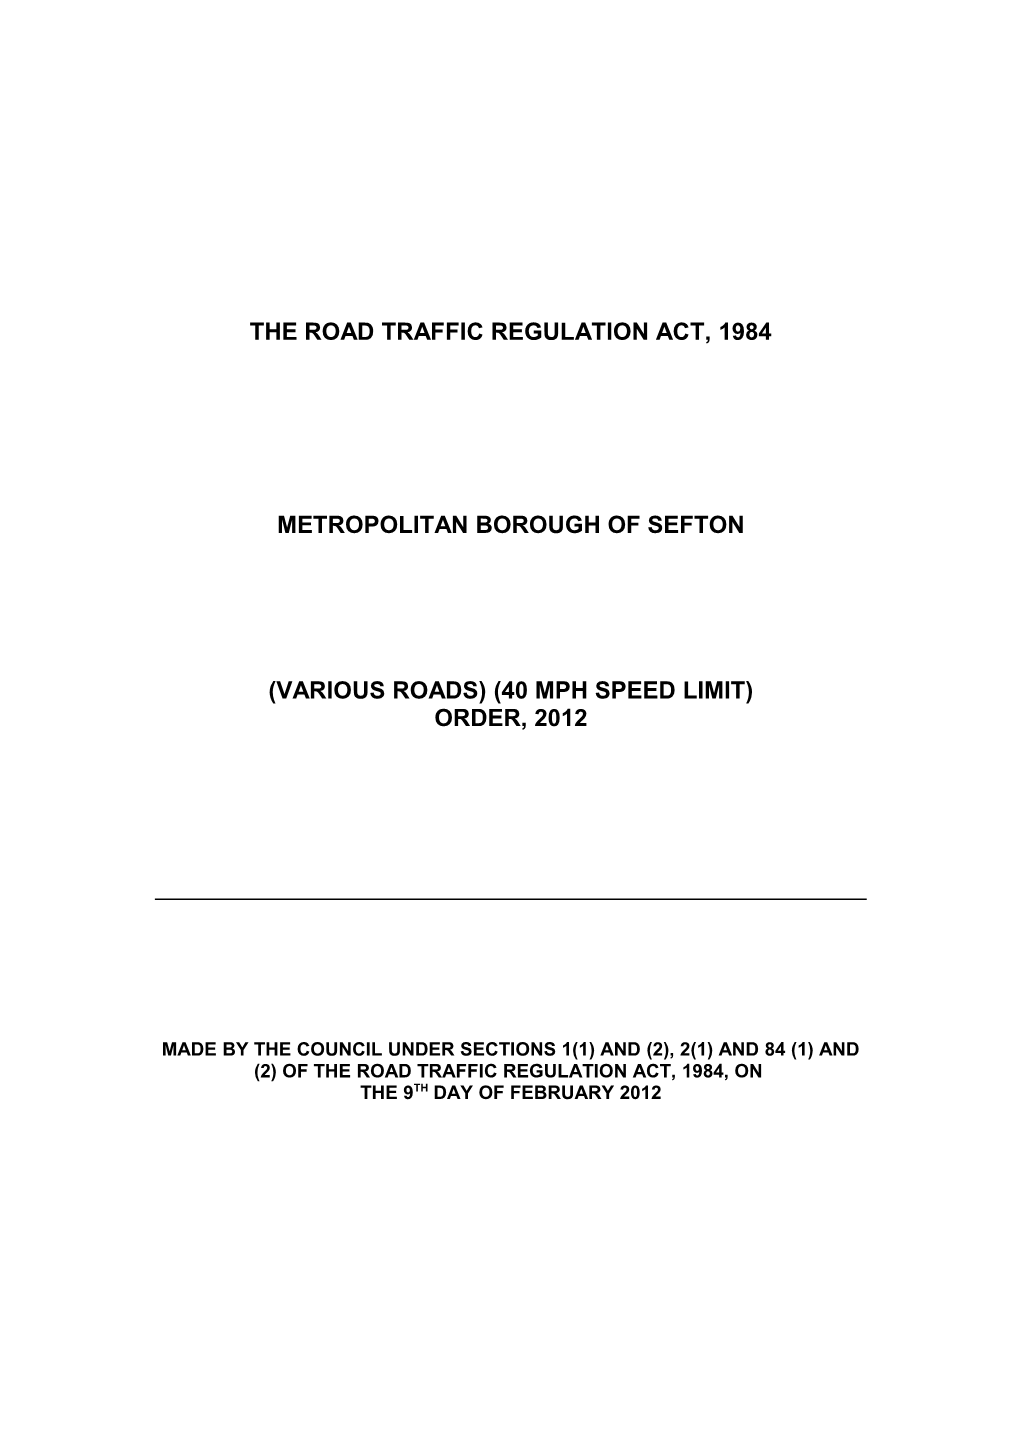 The Road Traffic Regulation Act, 1984